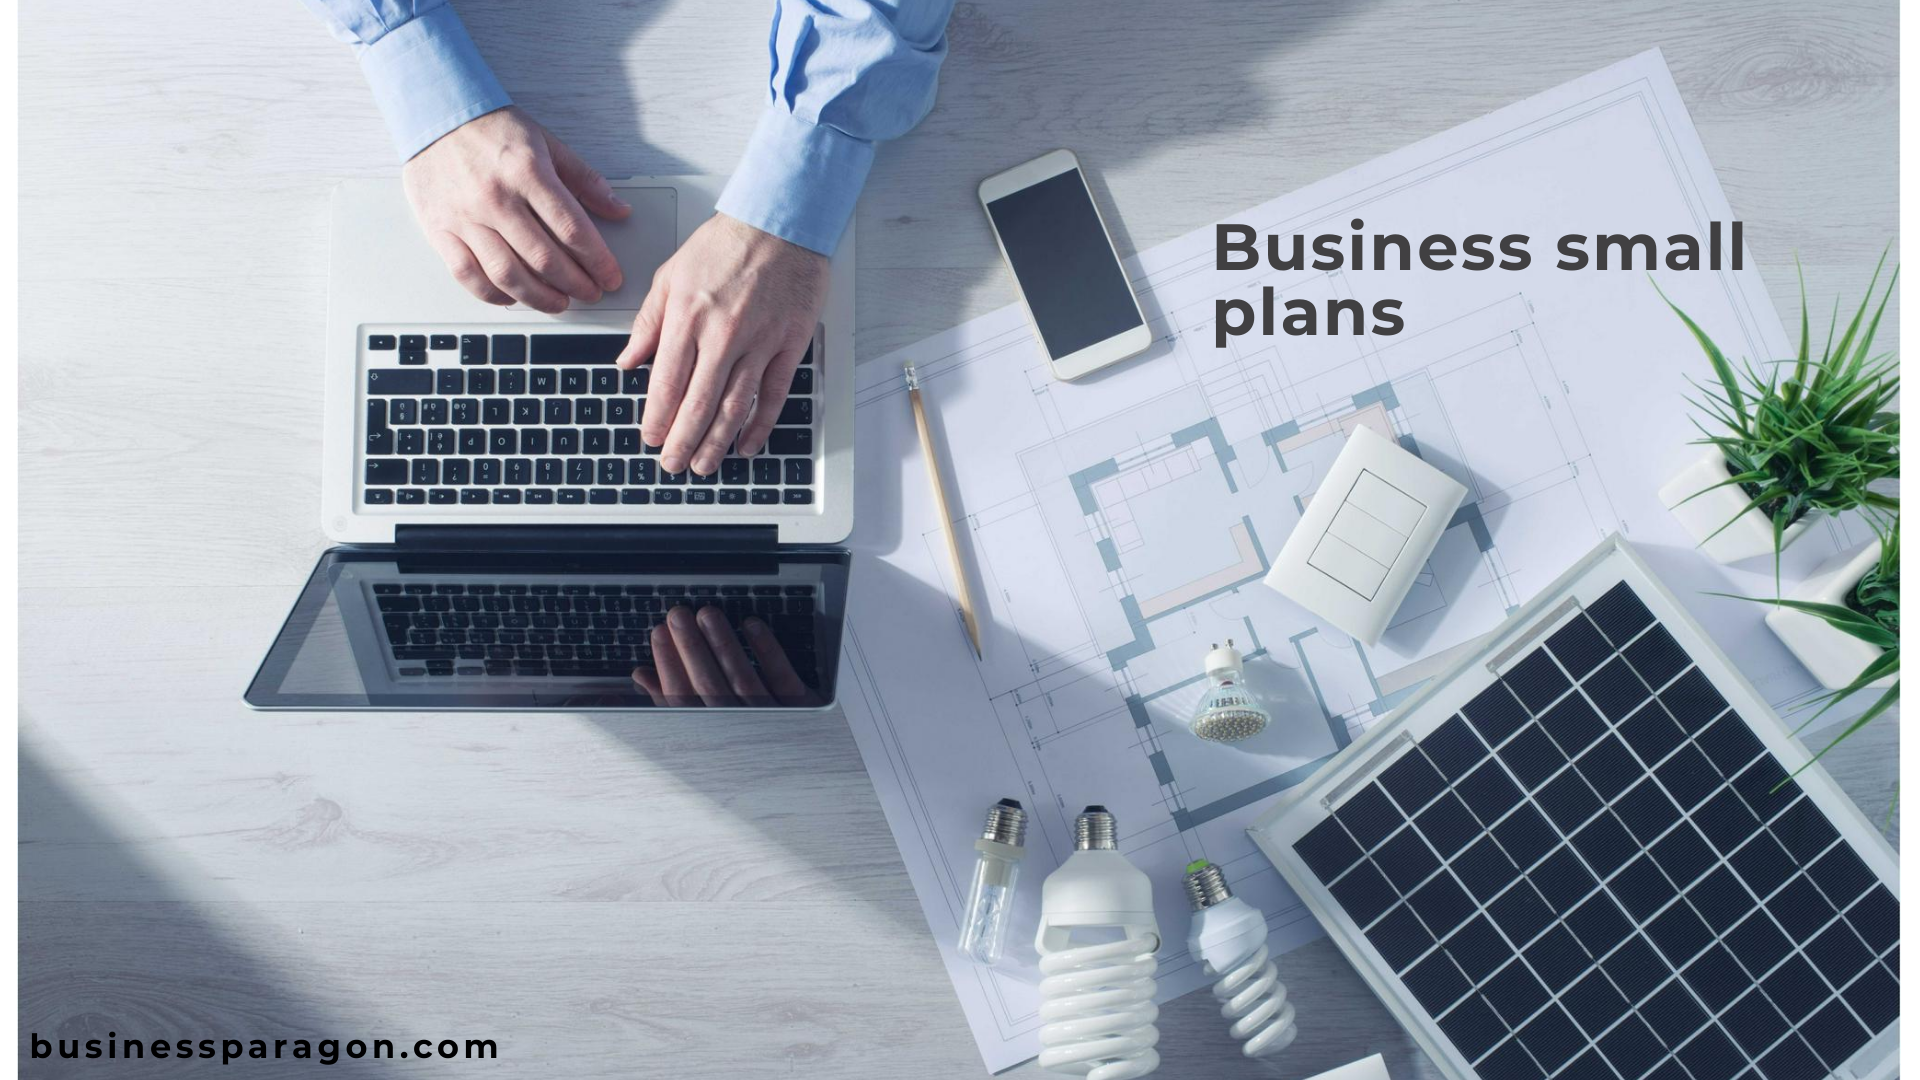 Business small plans